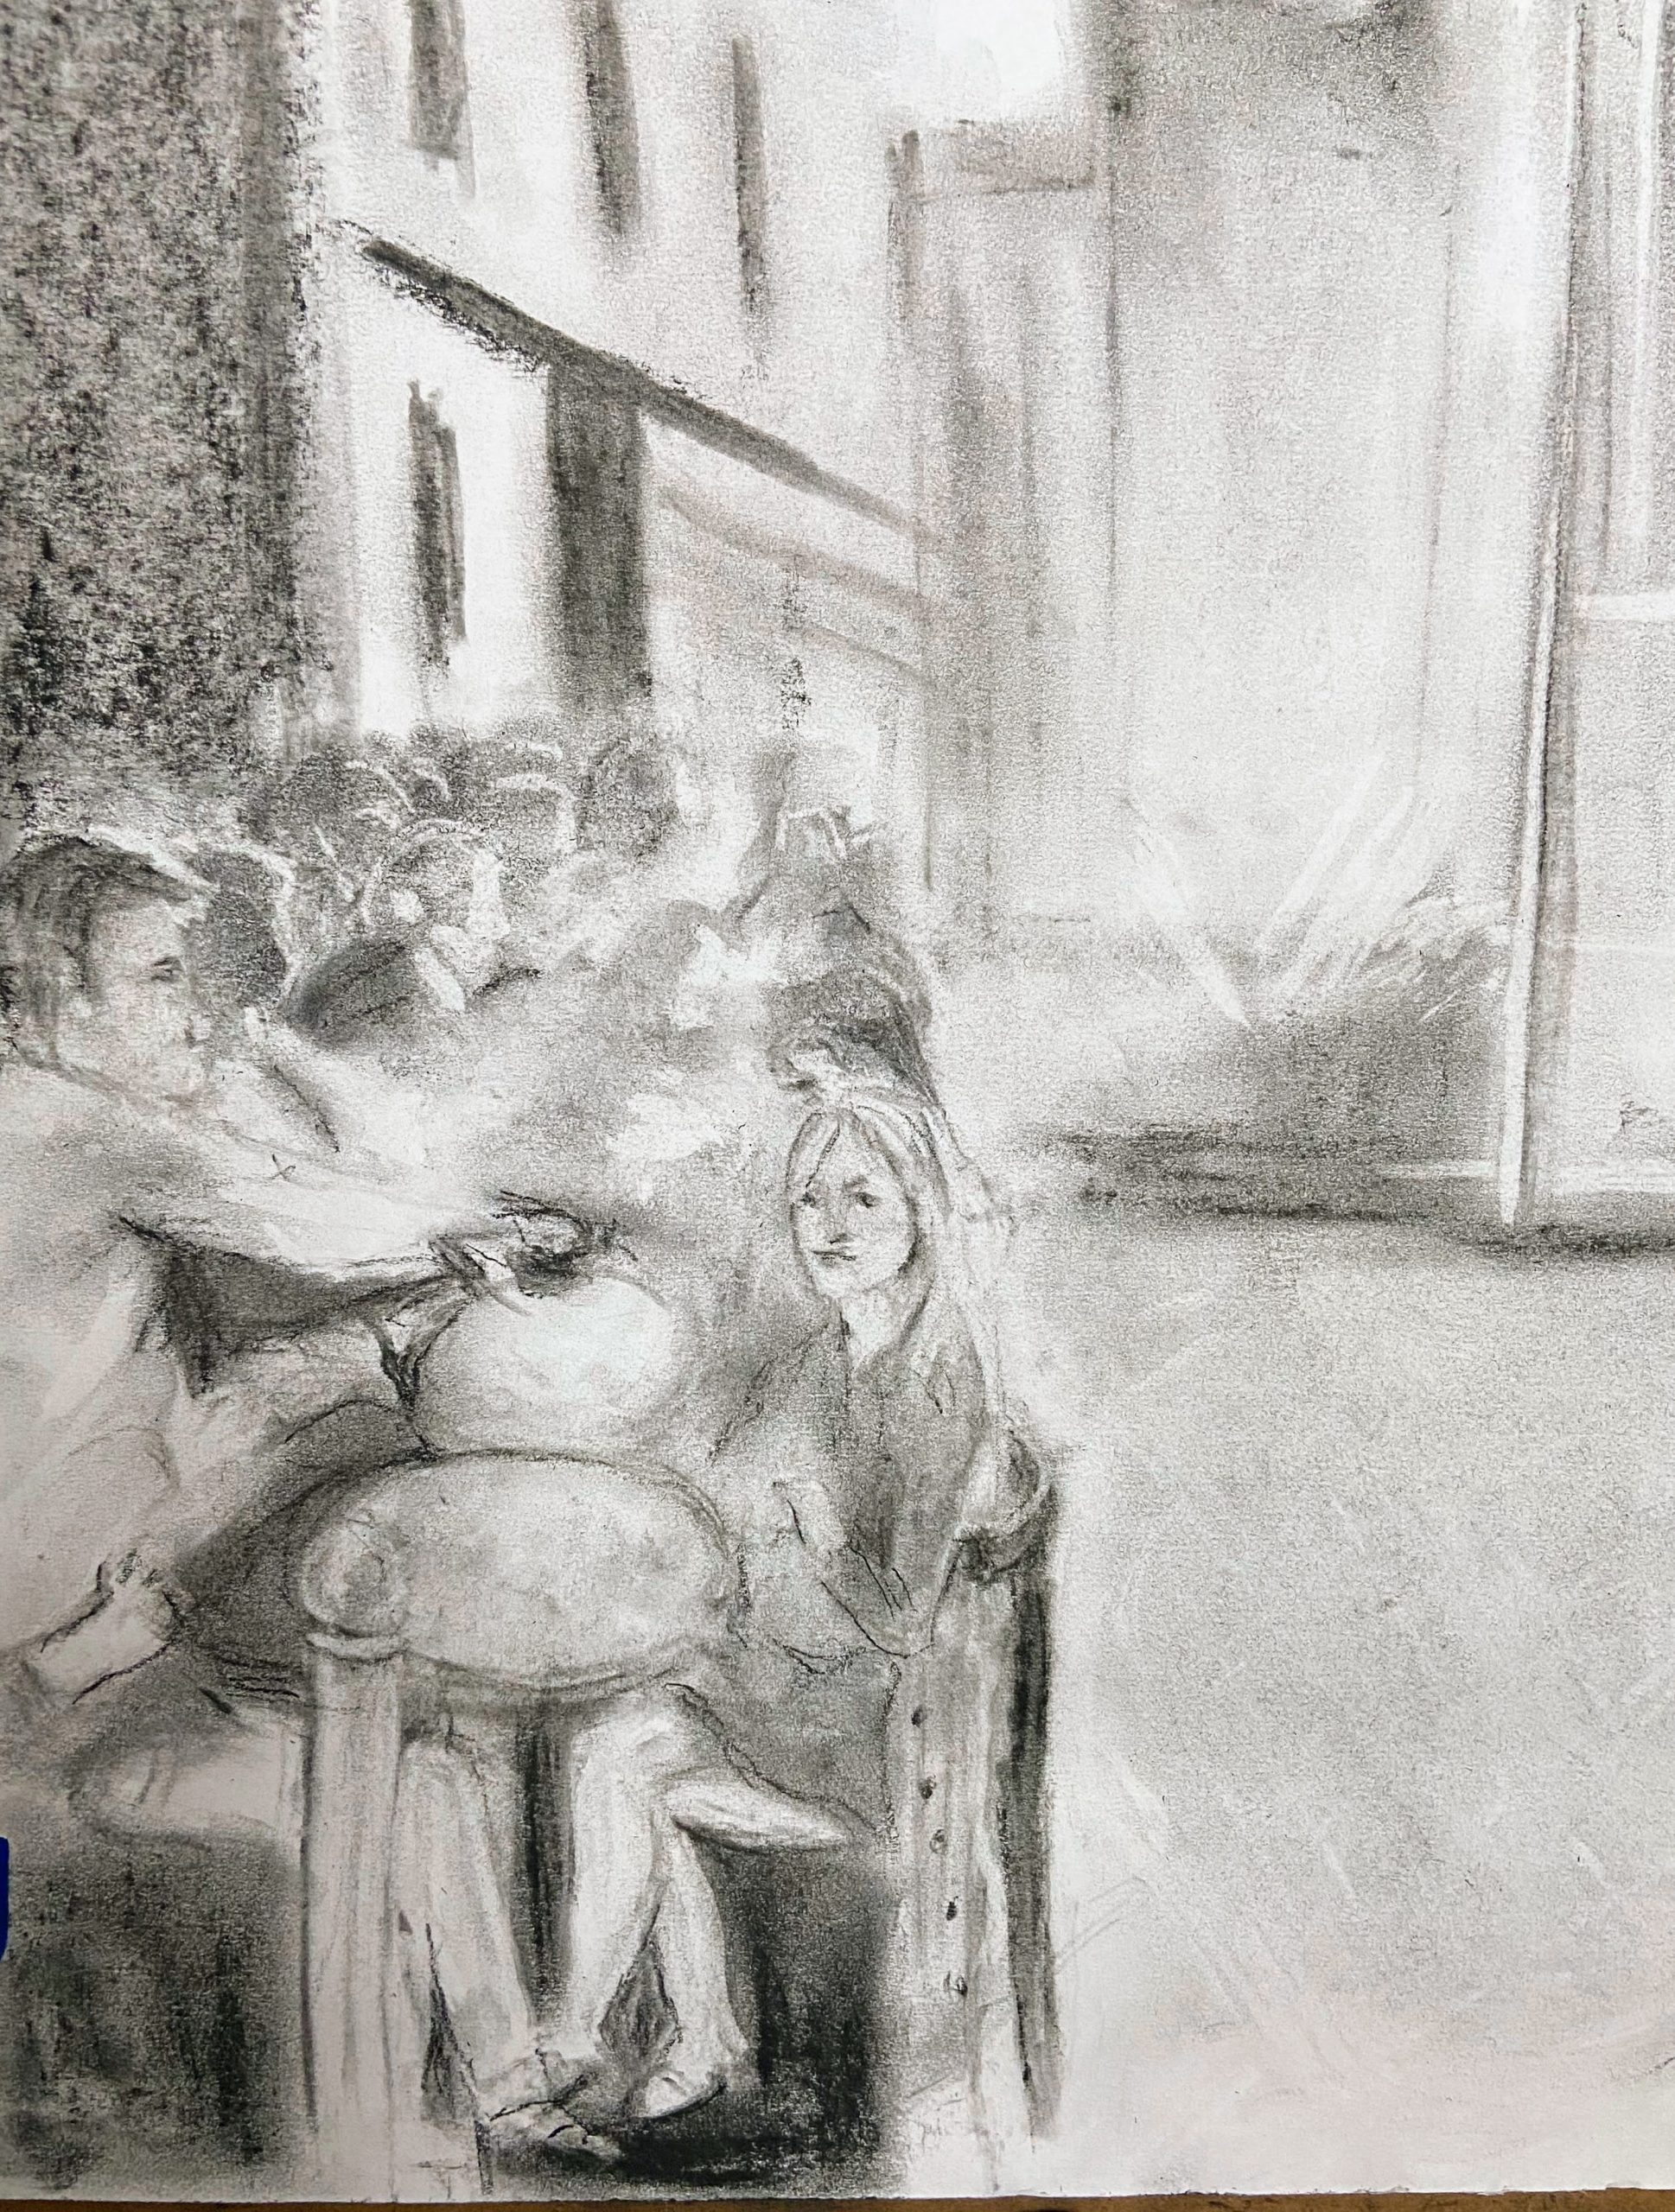 Charcoal drawing of a crowd of people at an outdoor cafe